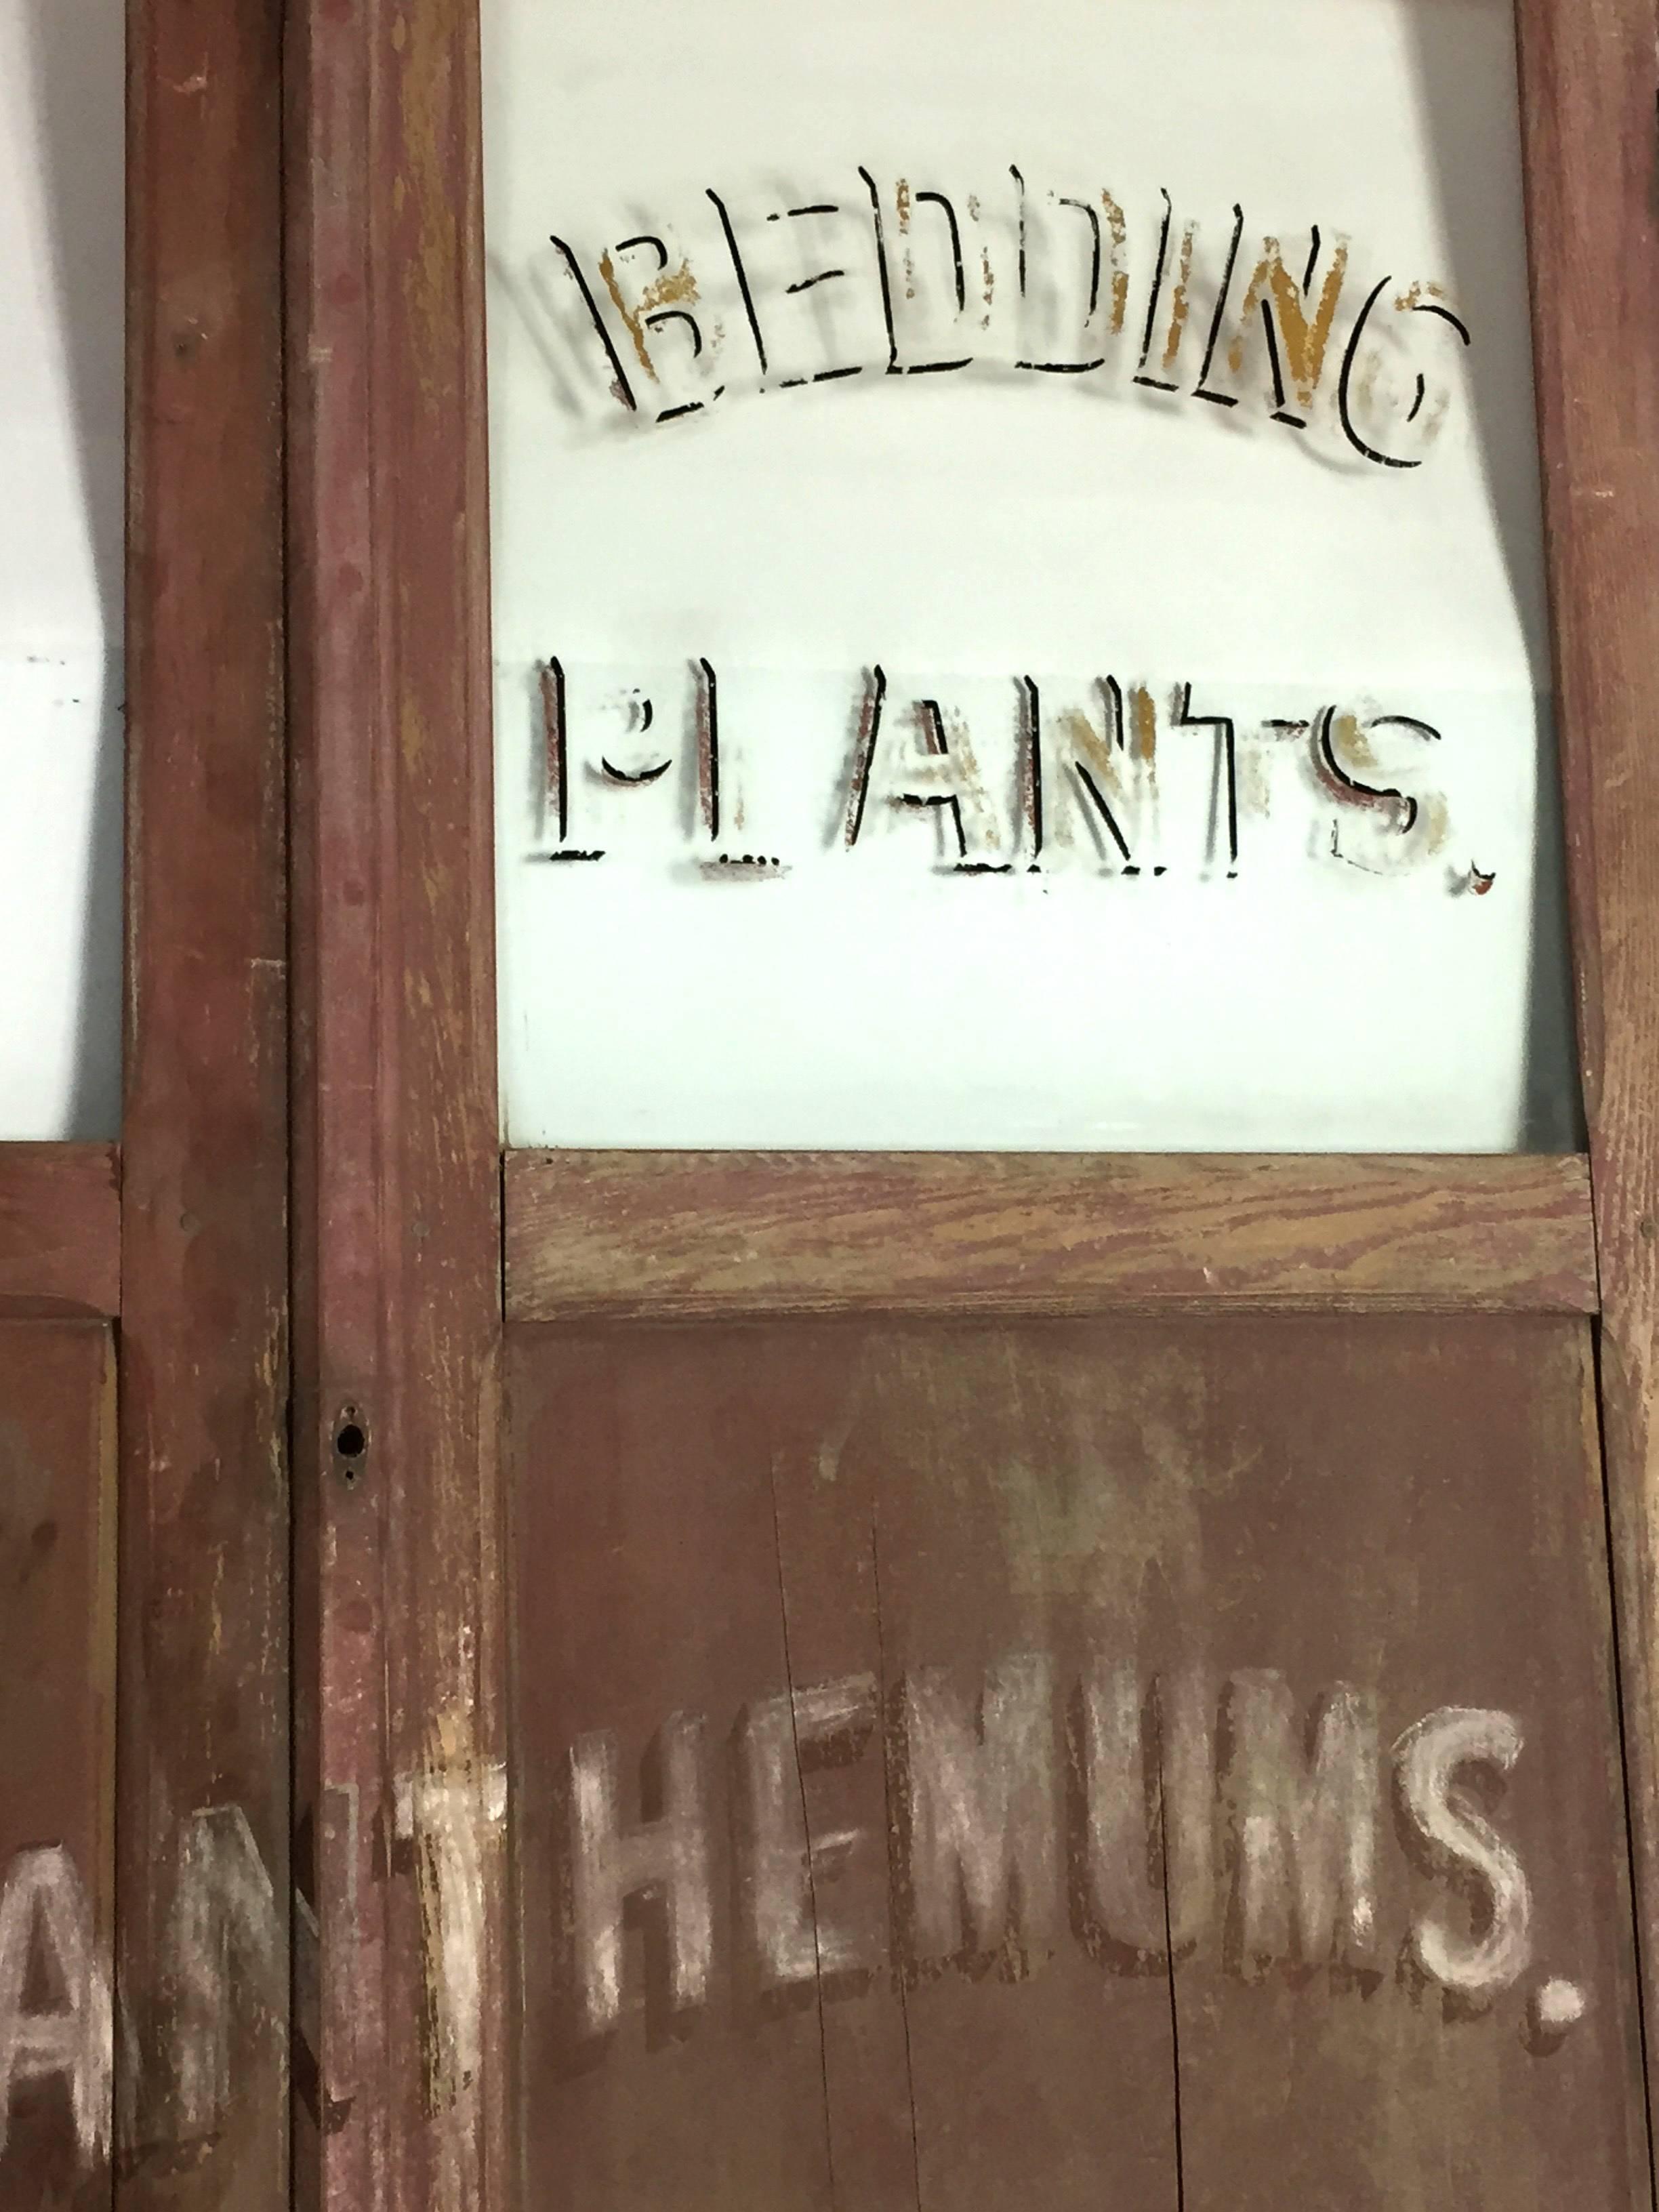 American sign on old red painted half doors, circa 1890. All original Paint. These half size doors come from inside the flower shop. Not a traditional format for an old American Trade Sign but much more interesting than many. The doors become